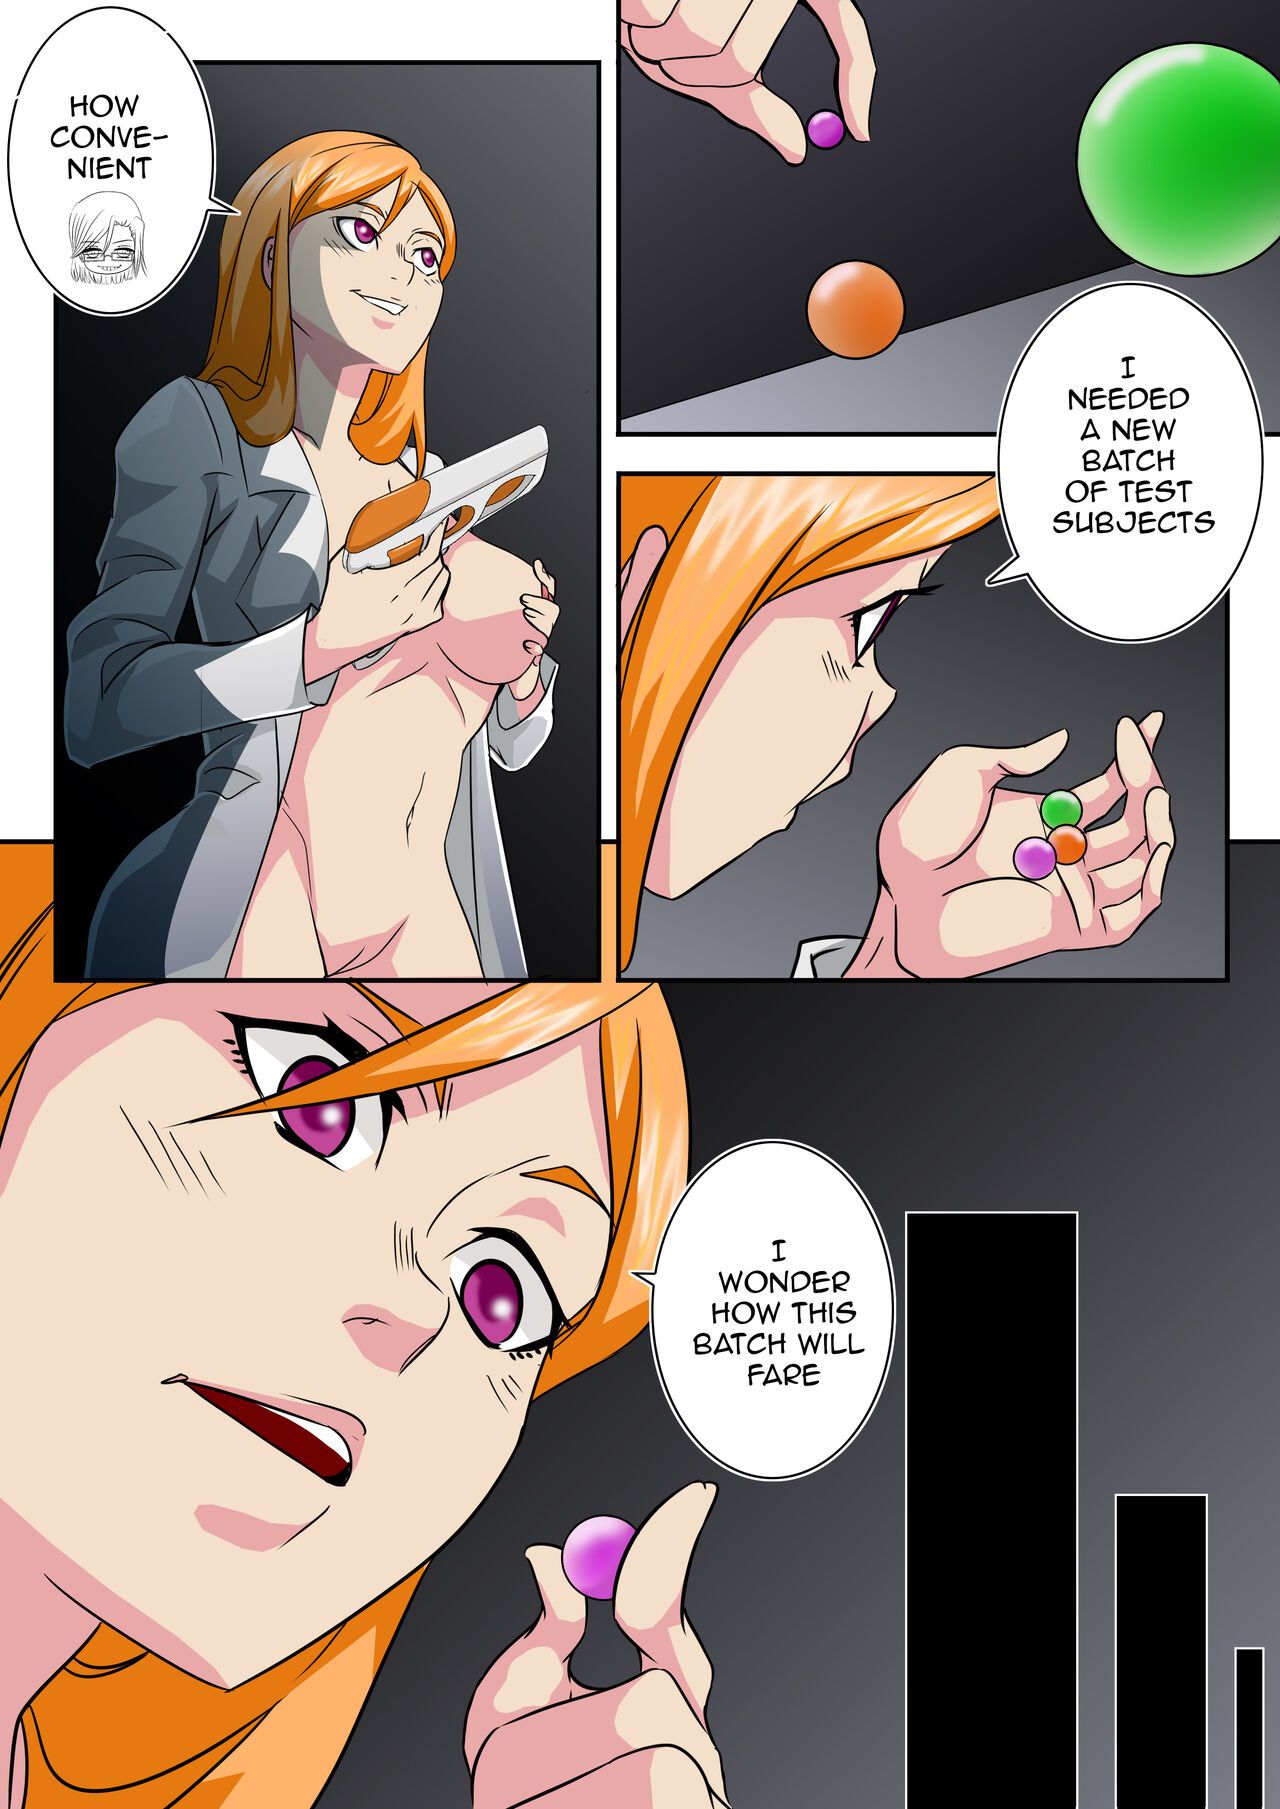 Bleach: A What If Story Part 5 Porn Comic english 57